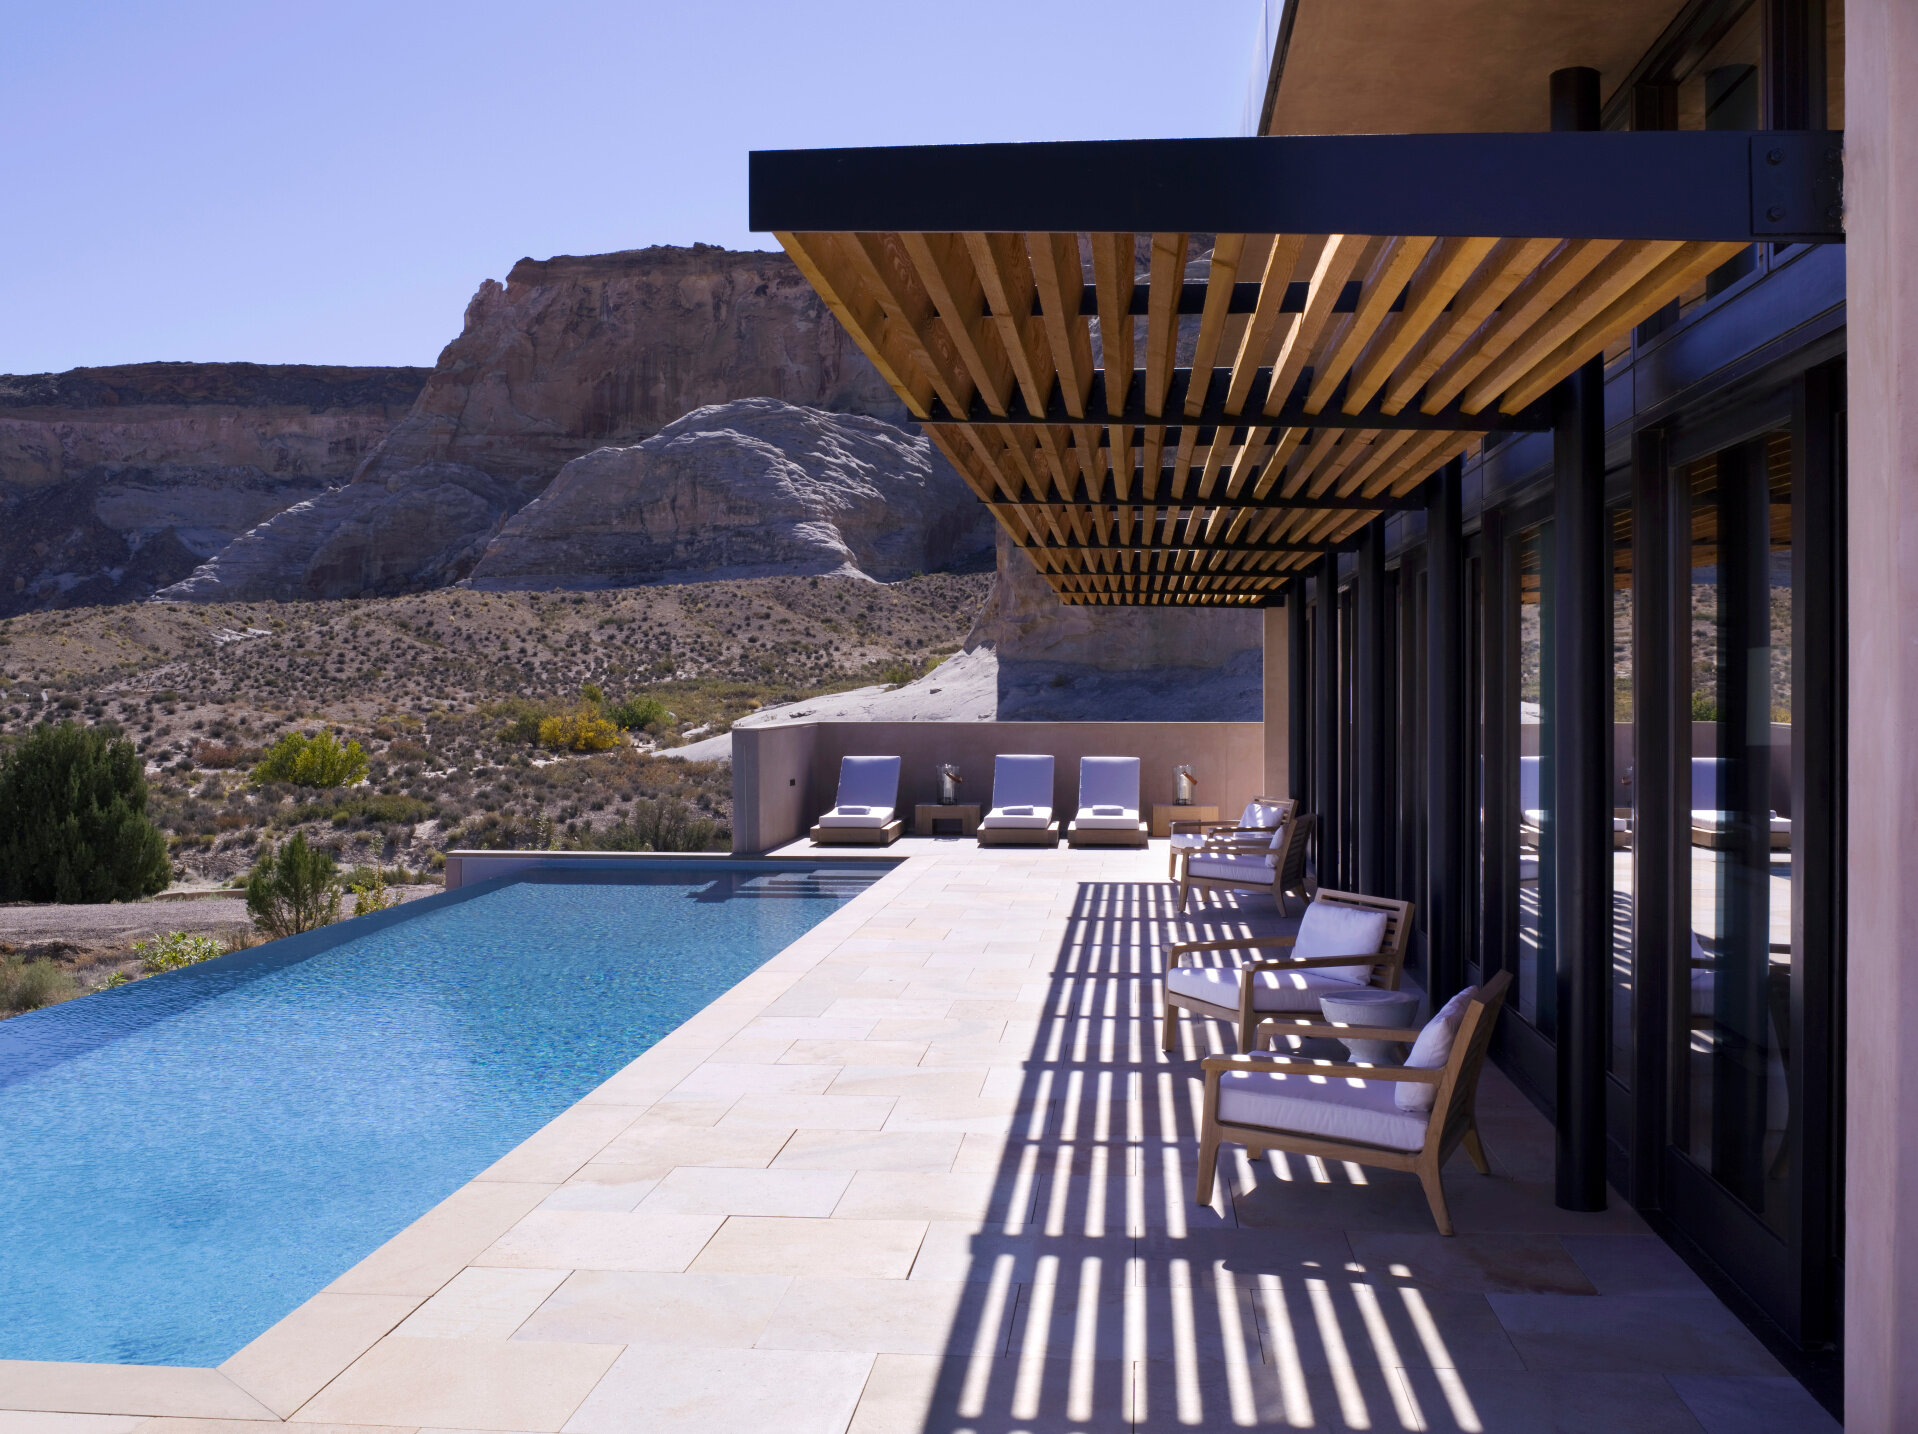   Private pool in the four-bedroom Mesa House at Amangiri (photo credit: Aman)  